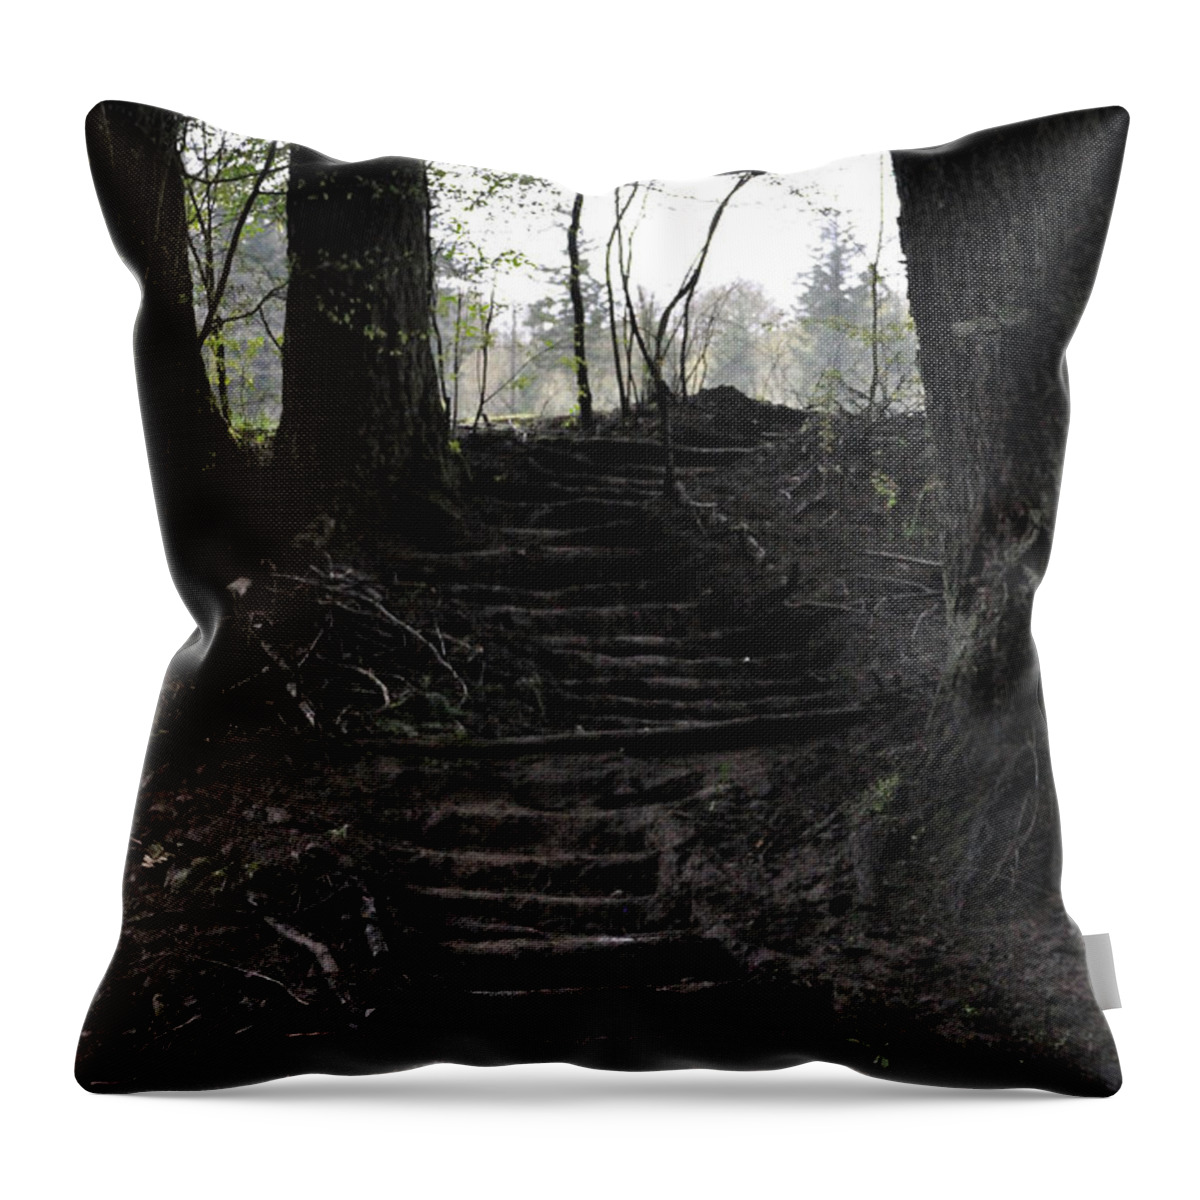 Stairs Throw Pillow featuring the photograph The Climb by Heather L Wright